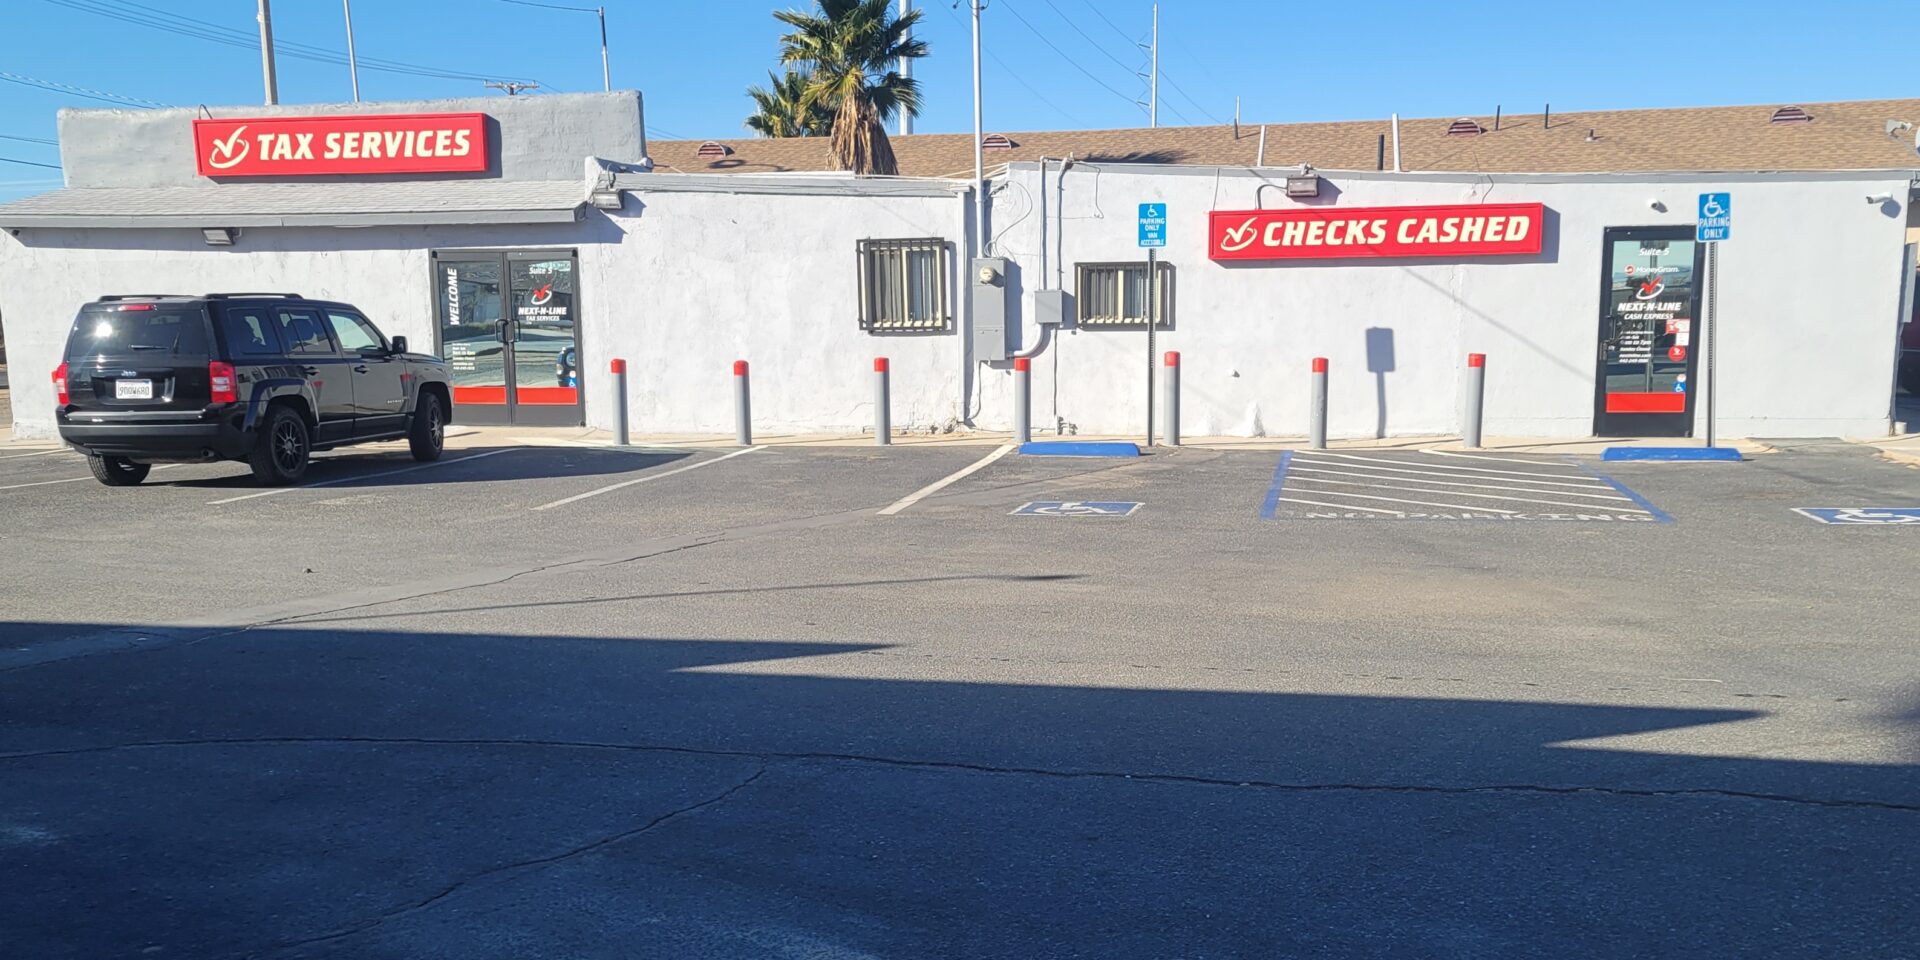 A parking lot with two cars parked in it.